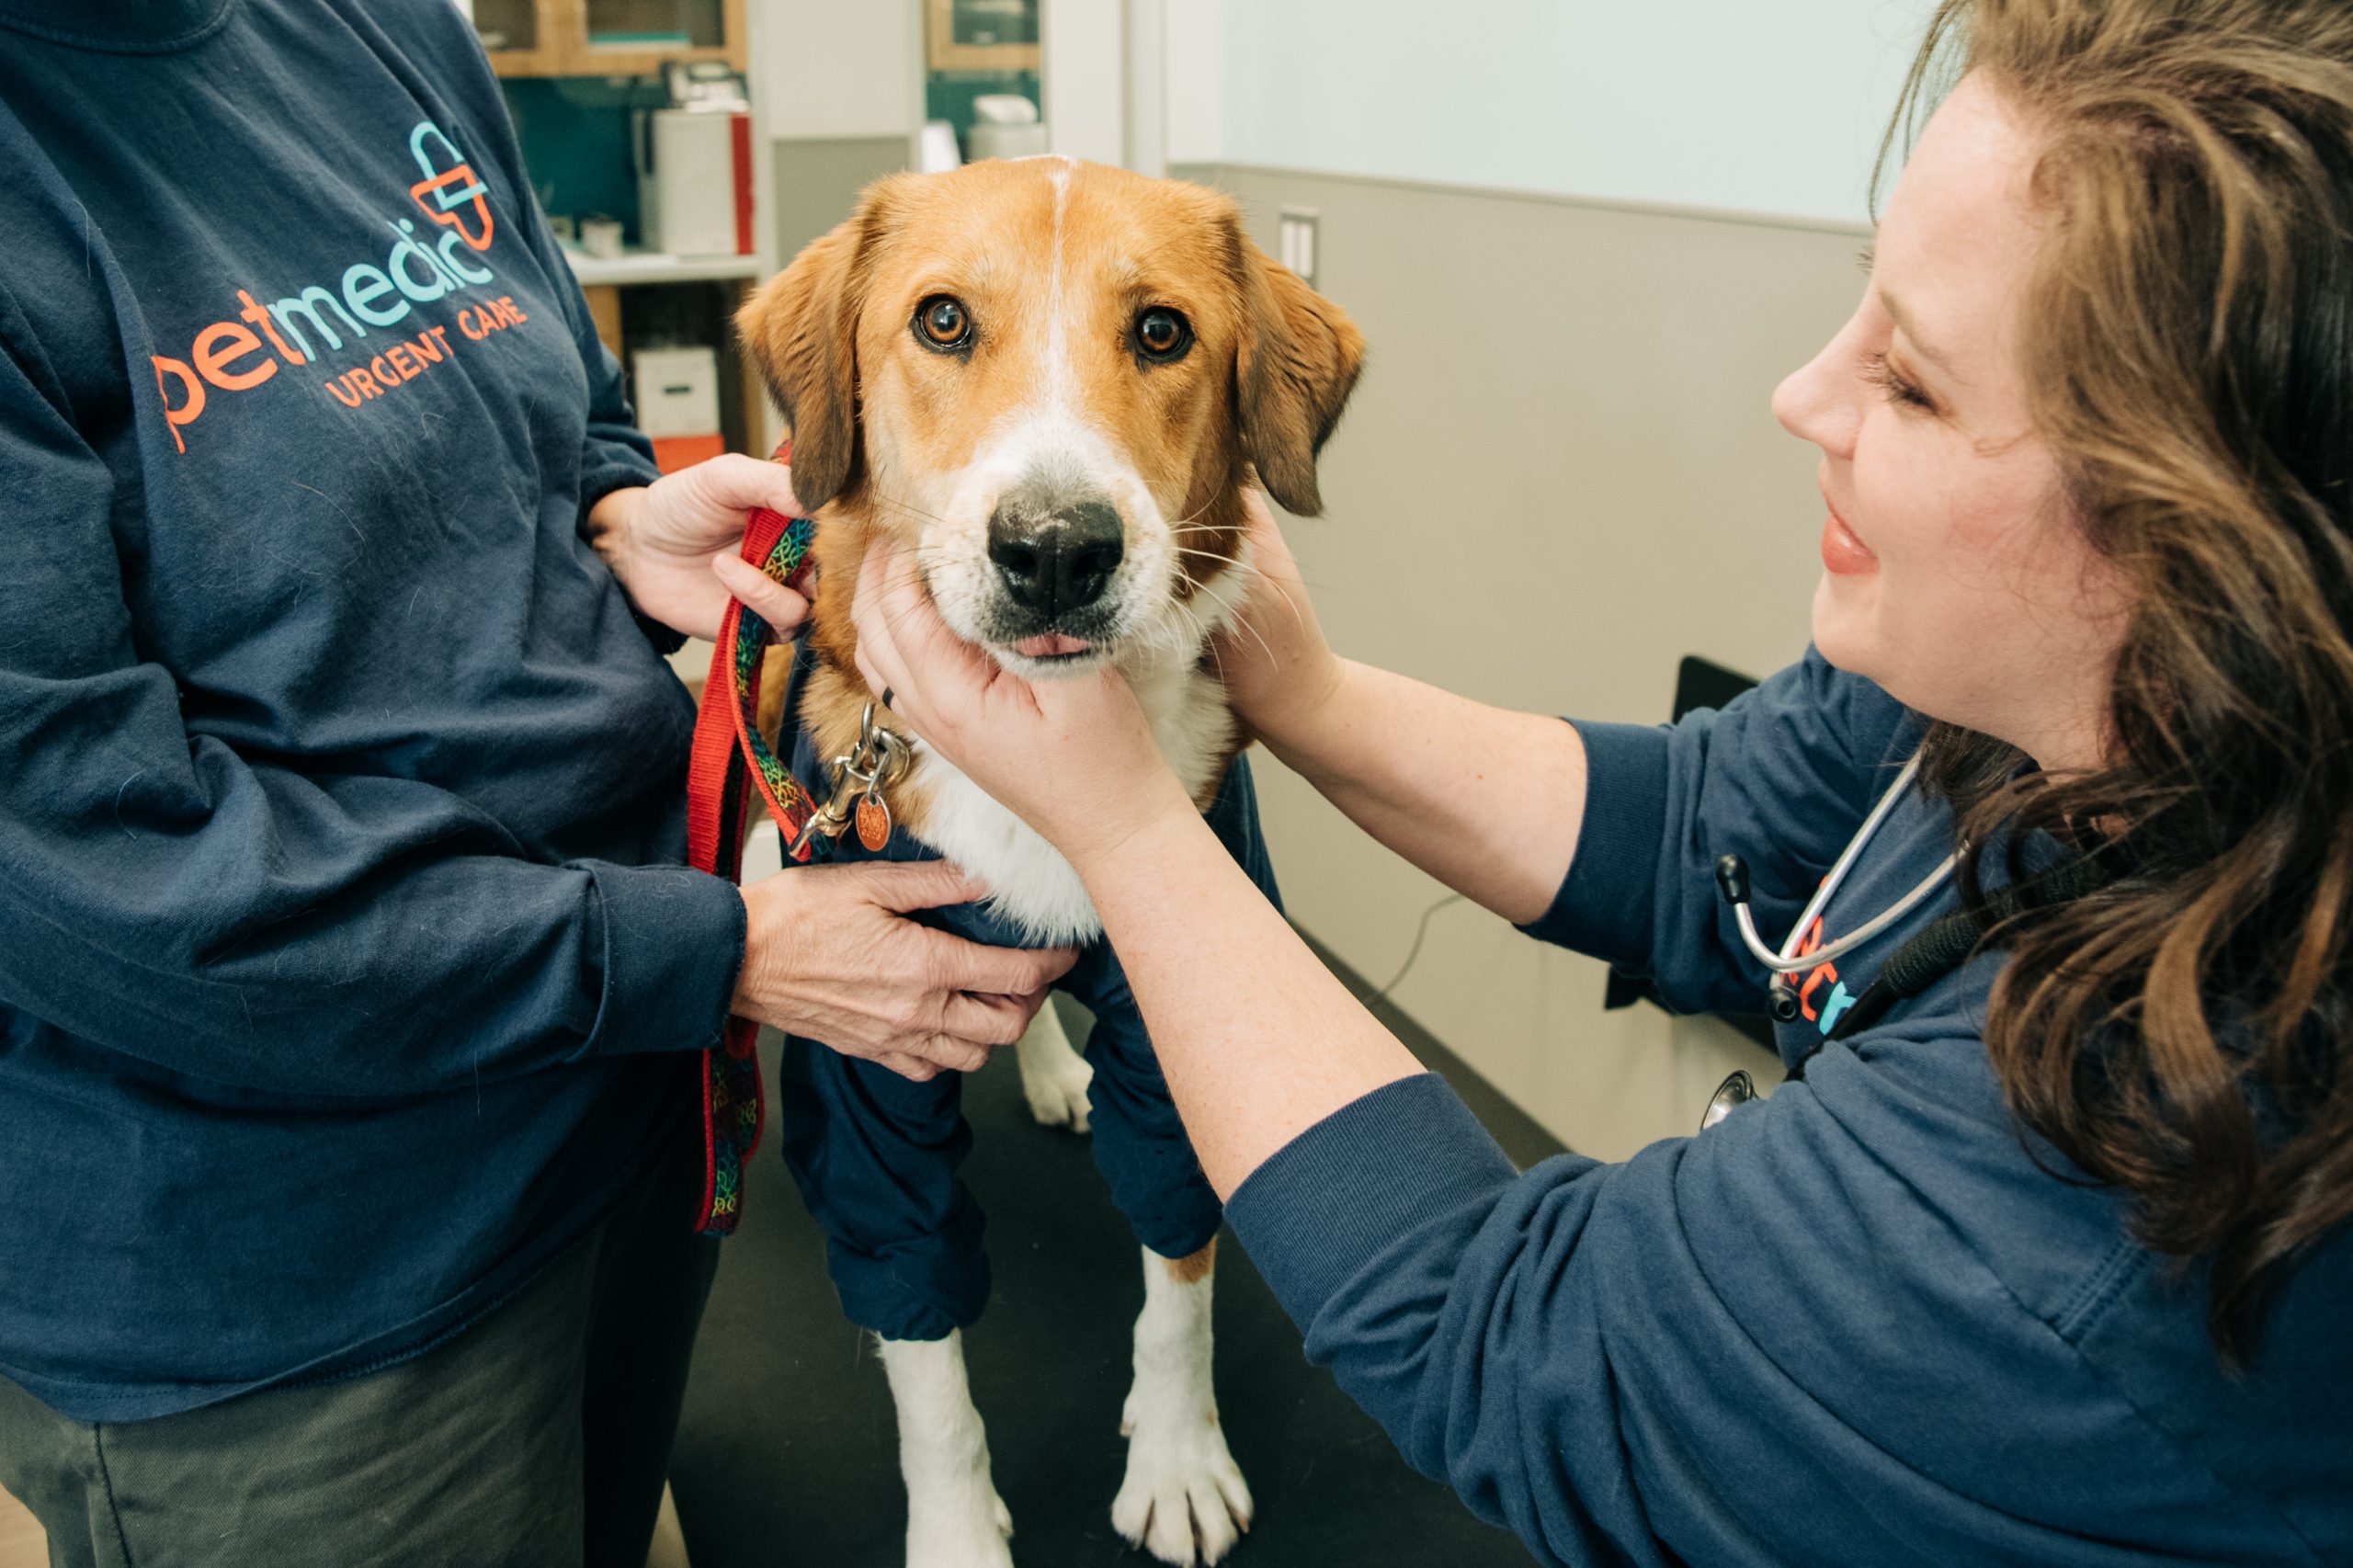 PetMedic Urgent Care Vet Clinic to Open Two Additional Massachusetts  Locations as Part of Expansive Growth Plan - PetMedic Urgent Care Vet Clinic